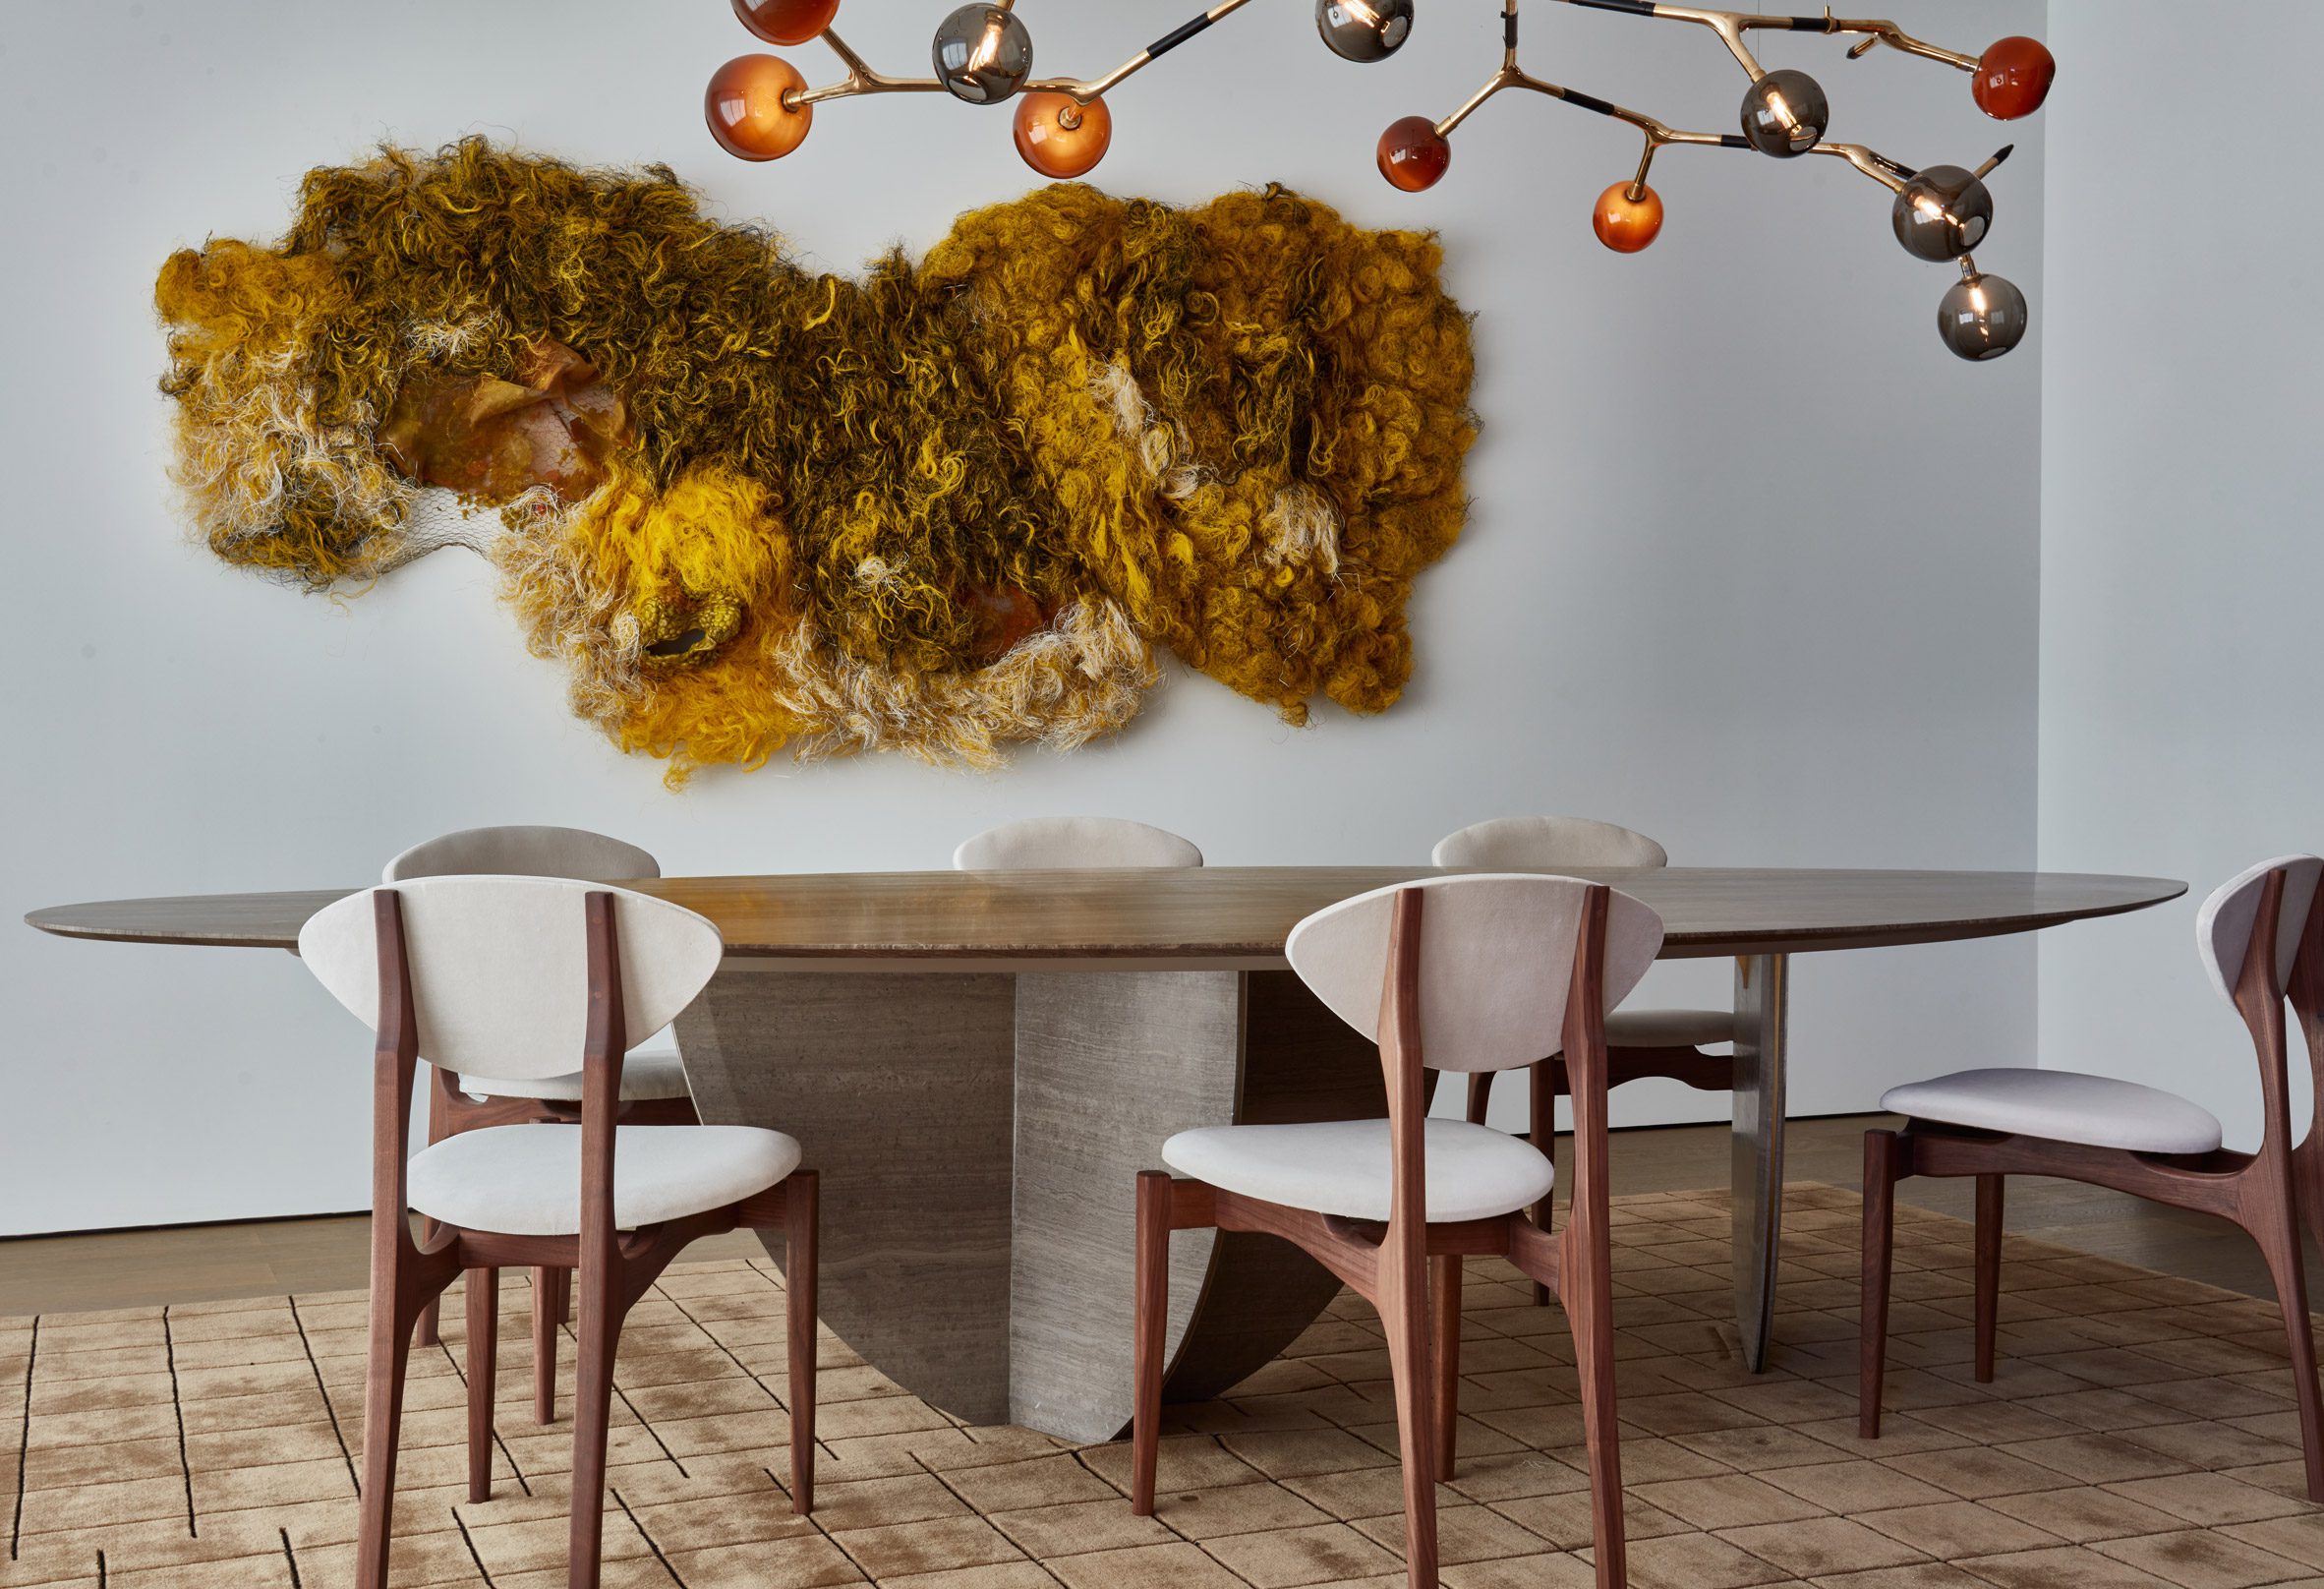 Sculptural dining table, branch-like chandelier and textured wall artwork